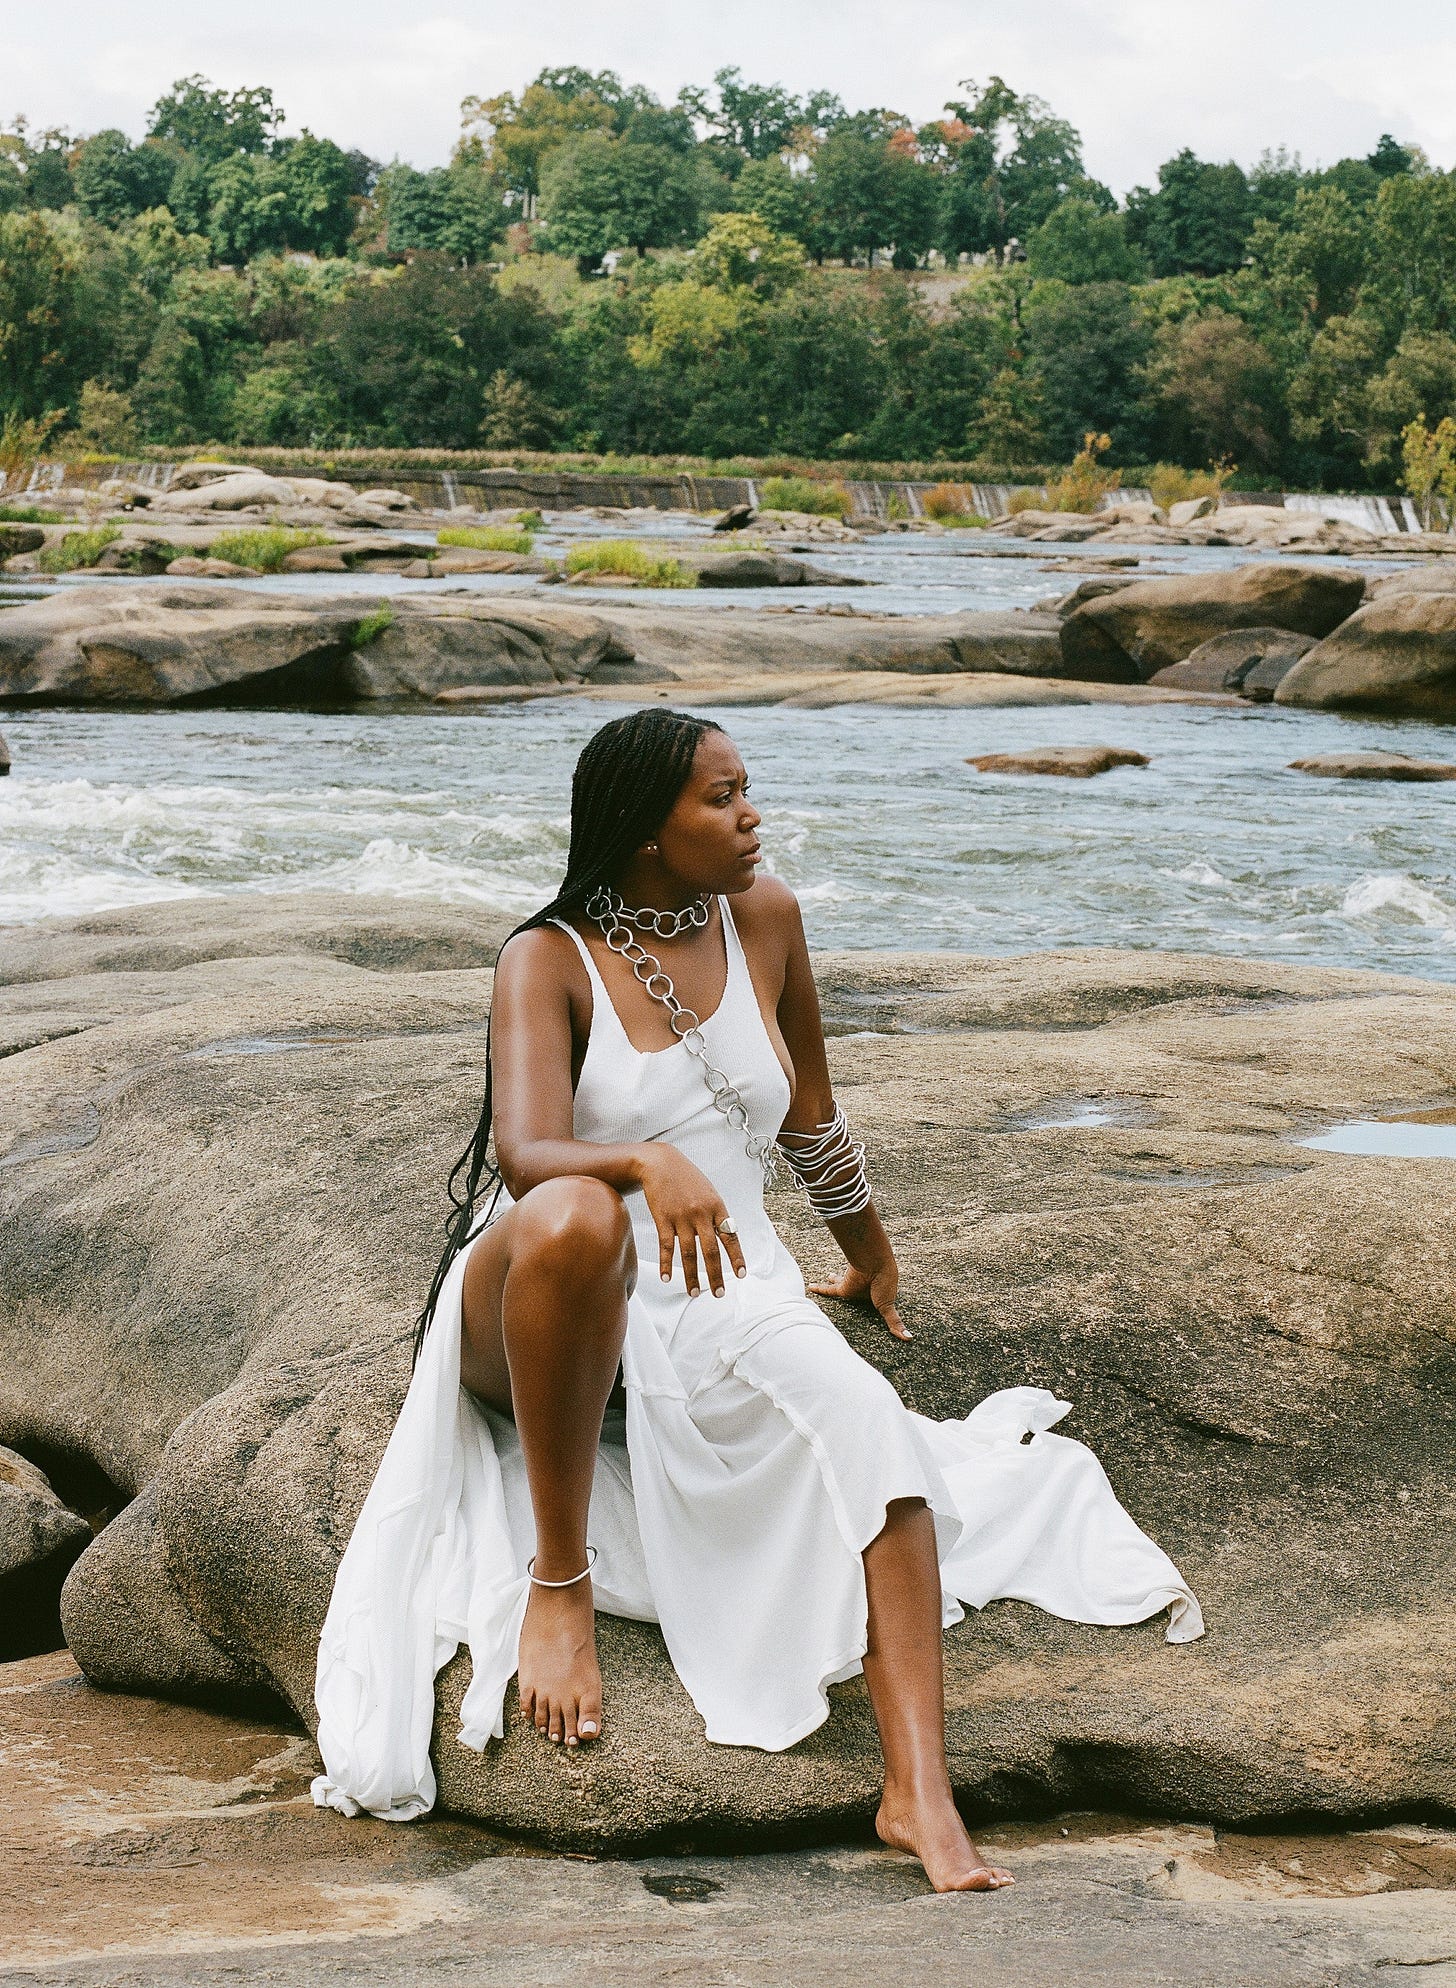 A black woman (me) with braids wearing a white dress looking away from the camera while sitting on top of river rocks with a tree line in the background.